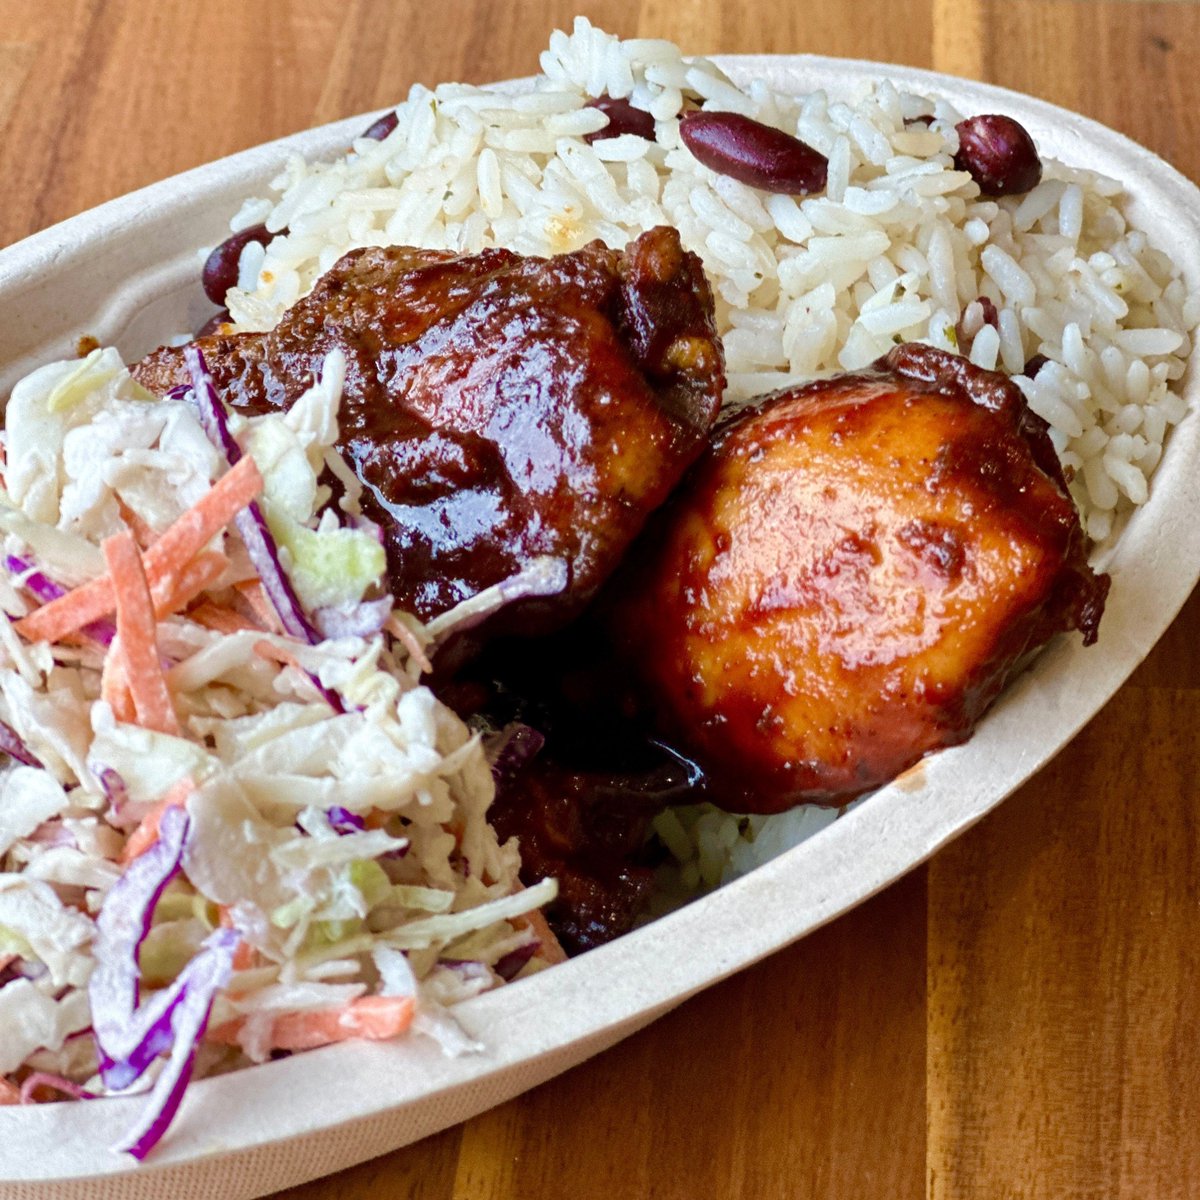 BBQ Chicken with Coconut Rice and Slaw.  A must for any Wednesday.

#joeyturks #hamilton #islandgrill #bbqchicken #islandflavours #lunch #dinner #realfood #islandvibes